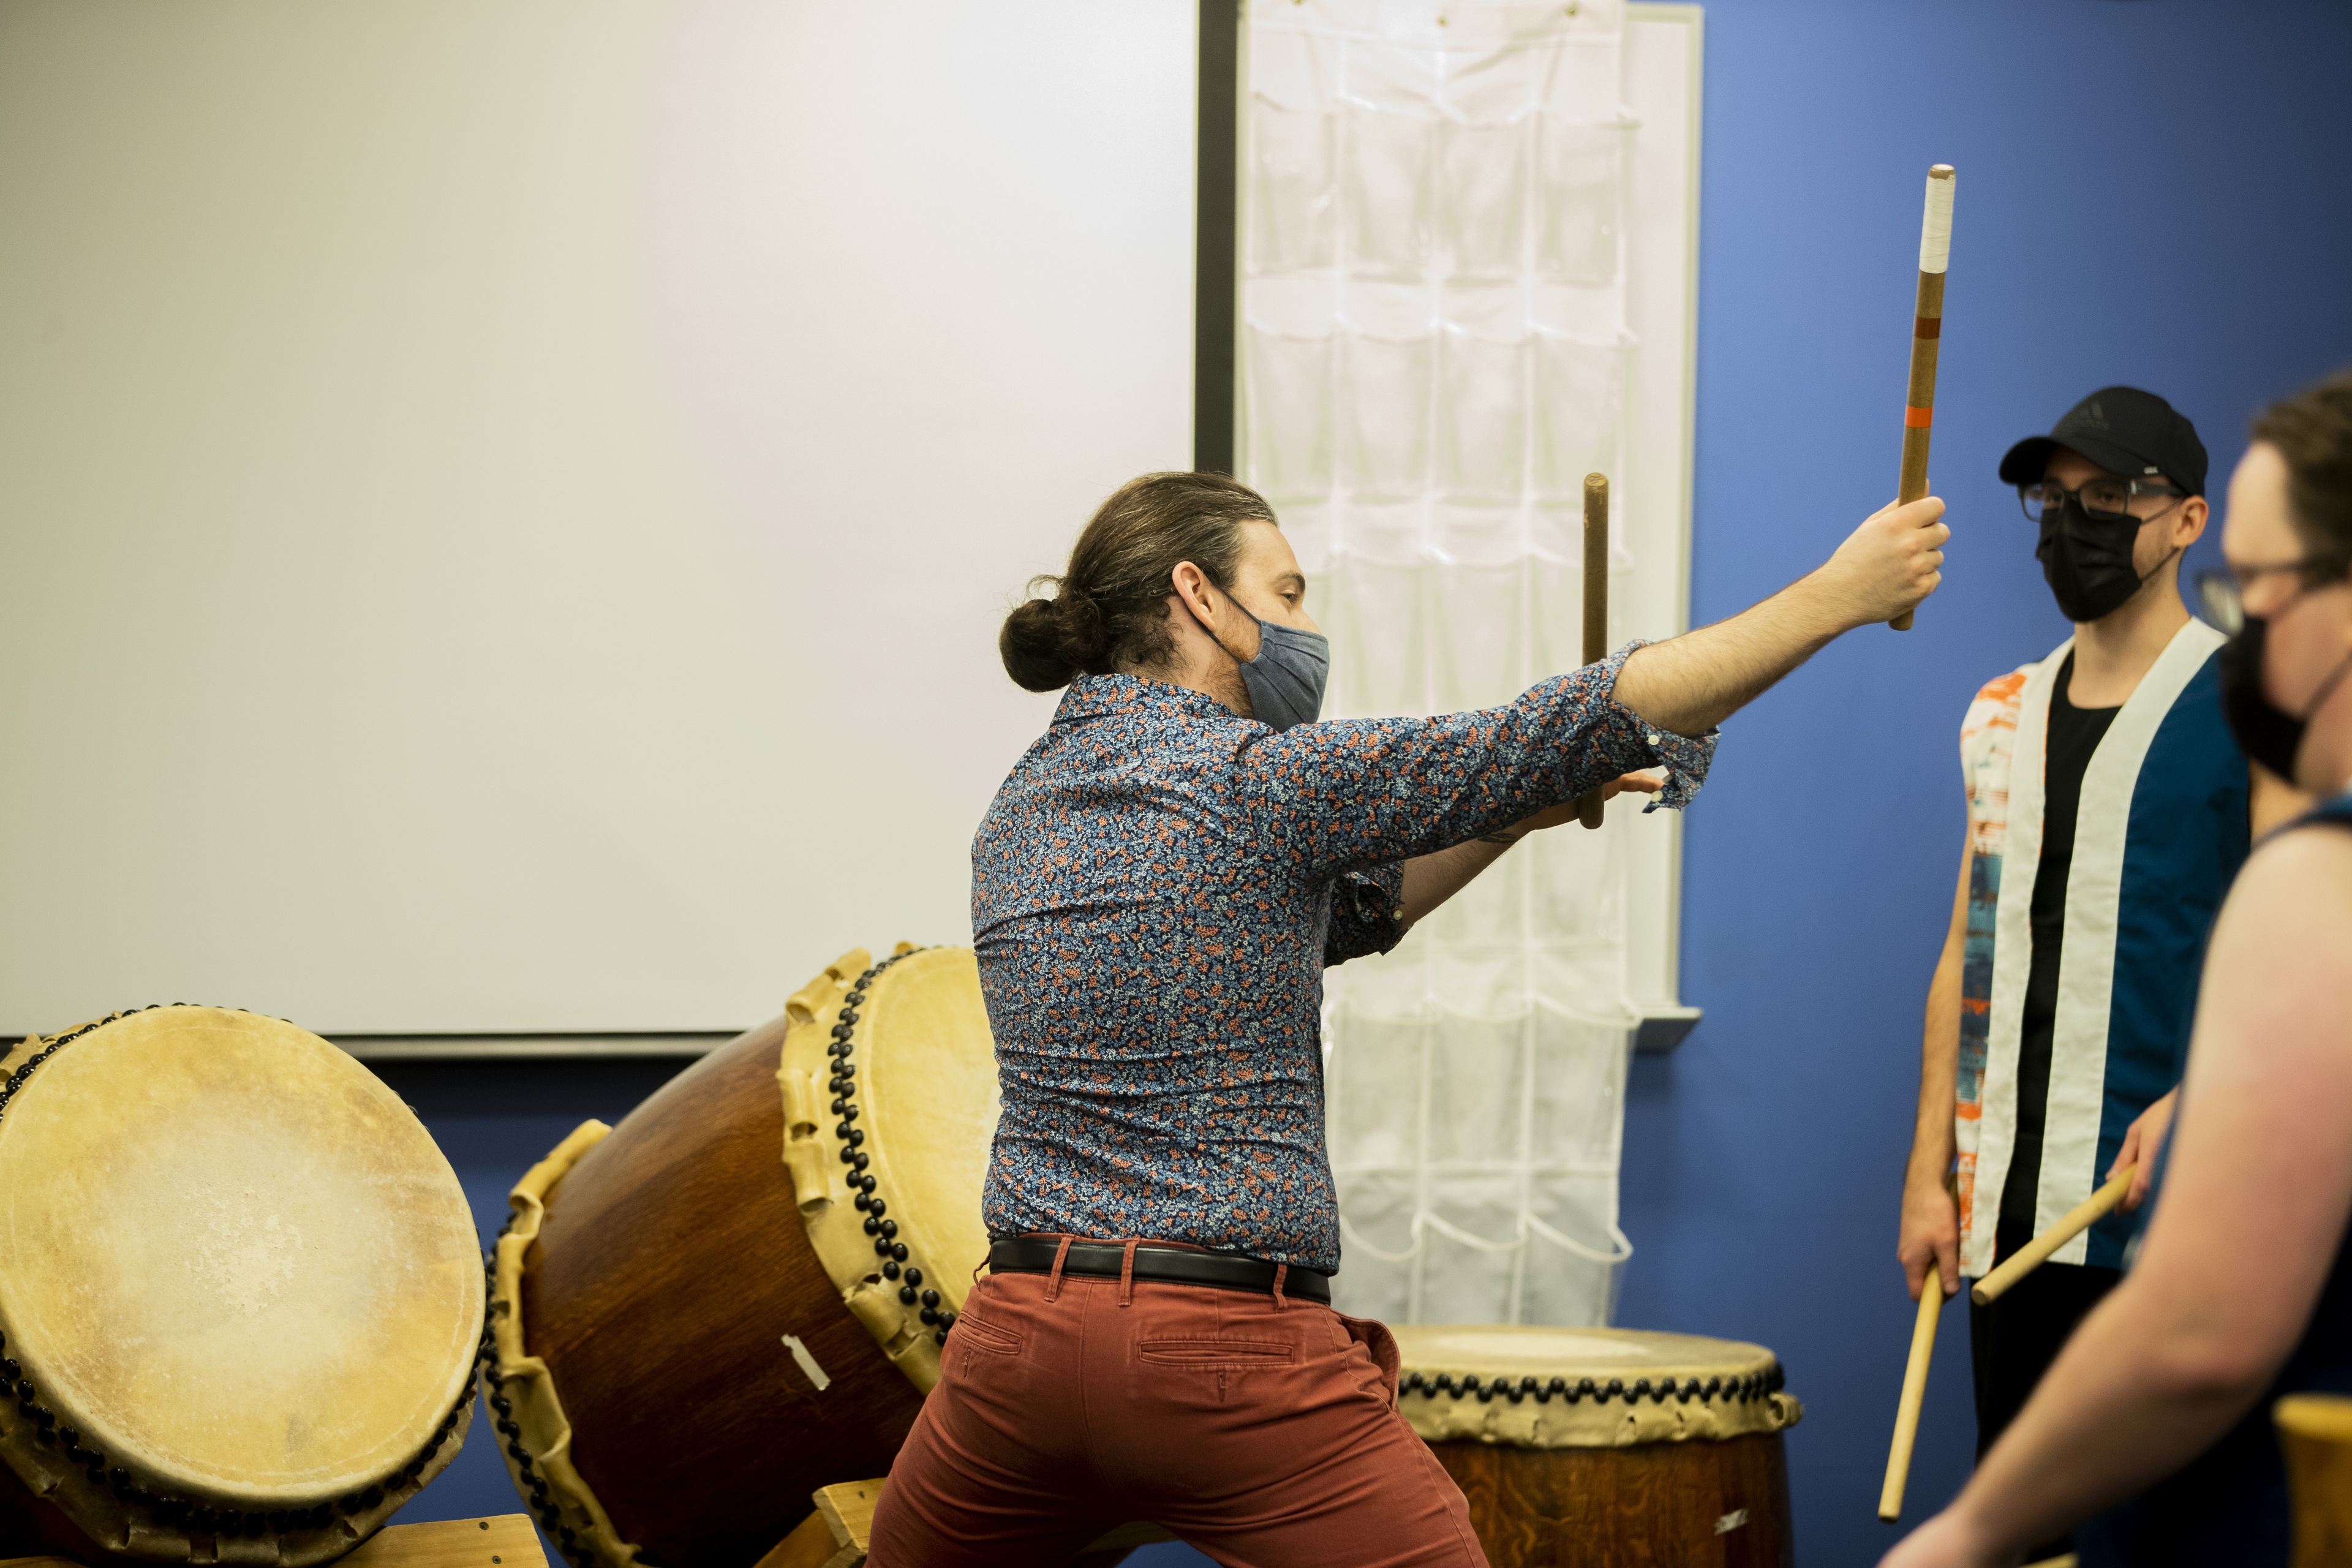 Kazenodaichi Taiko Drum demonstration. Student Demonstrates how to play taiko drums in Wolfe Center for the Arts